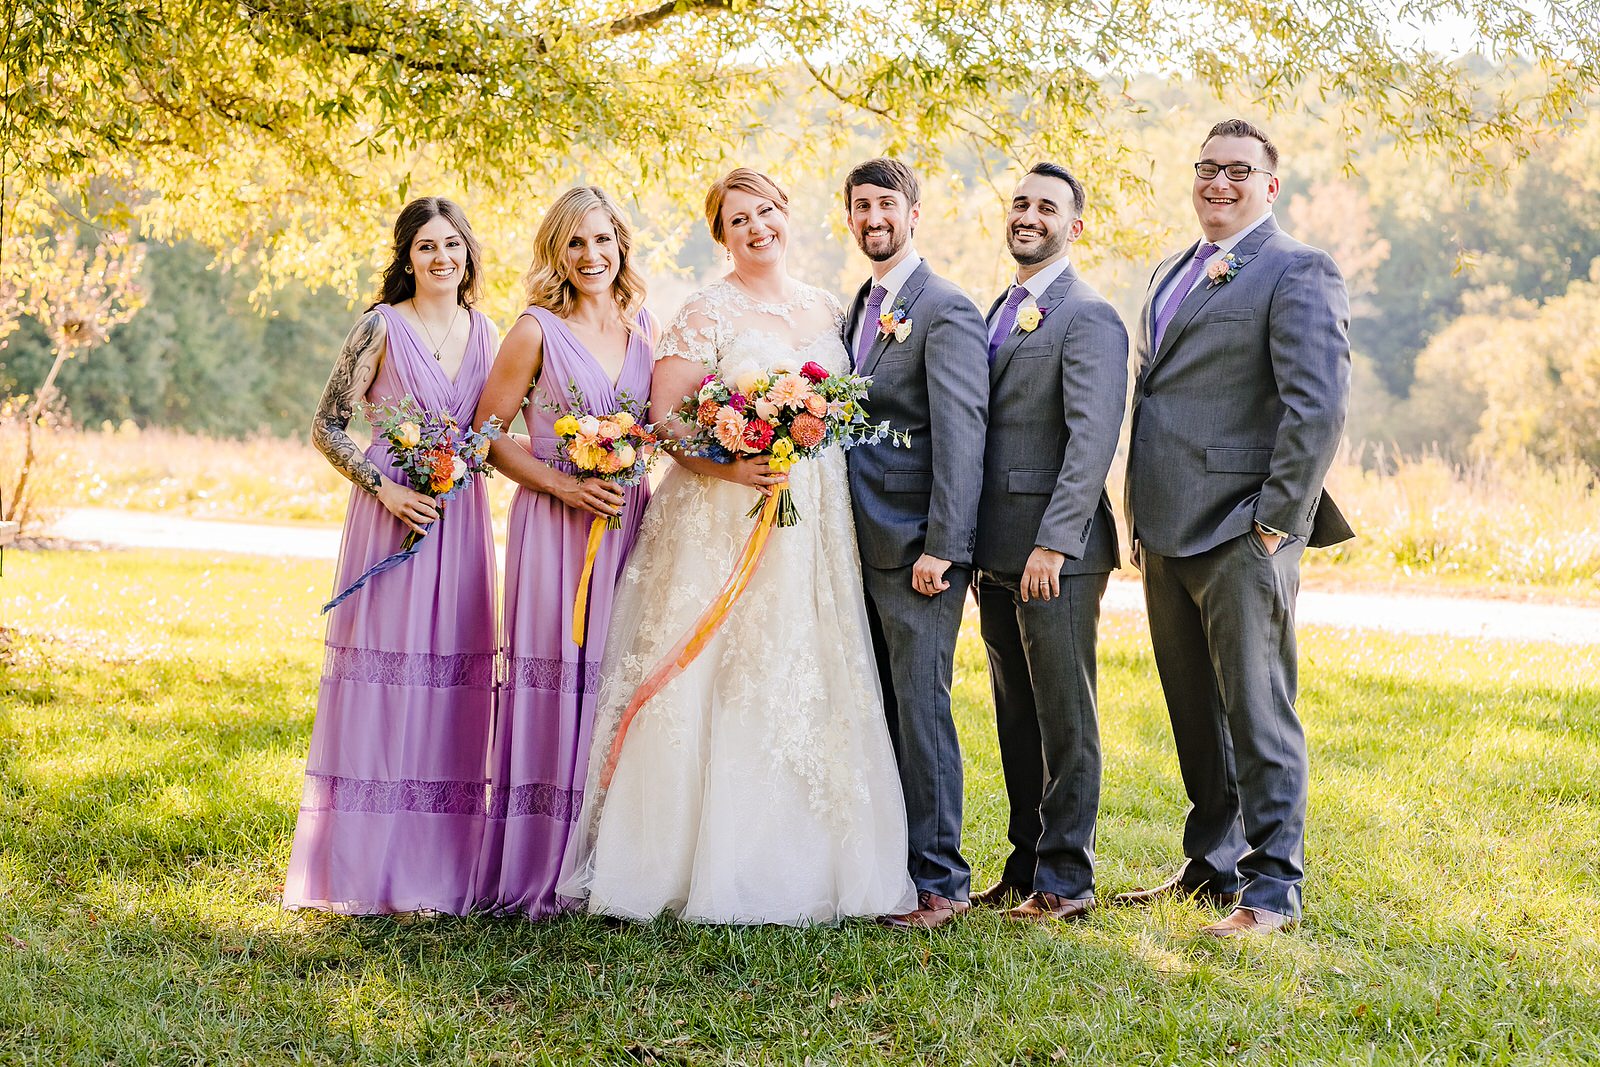 Wedding party style: lavendar bridesmaid dresses, grey suits, colorful bouquets of wildflowers